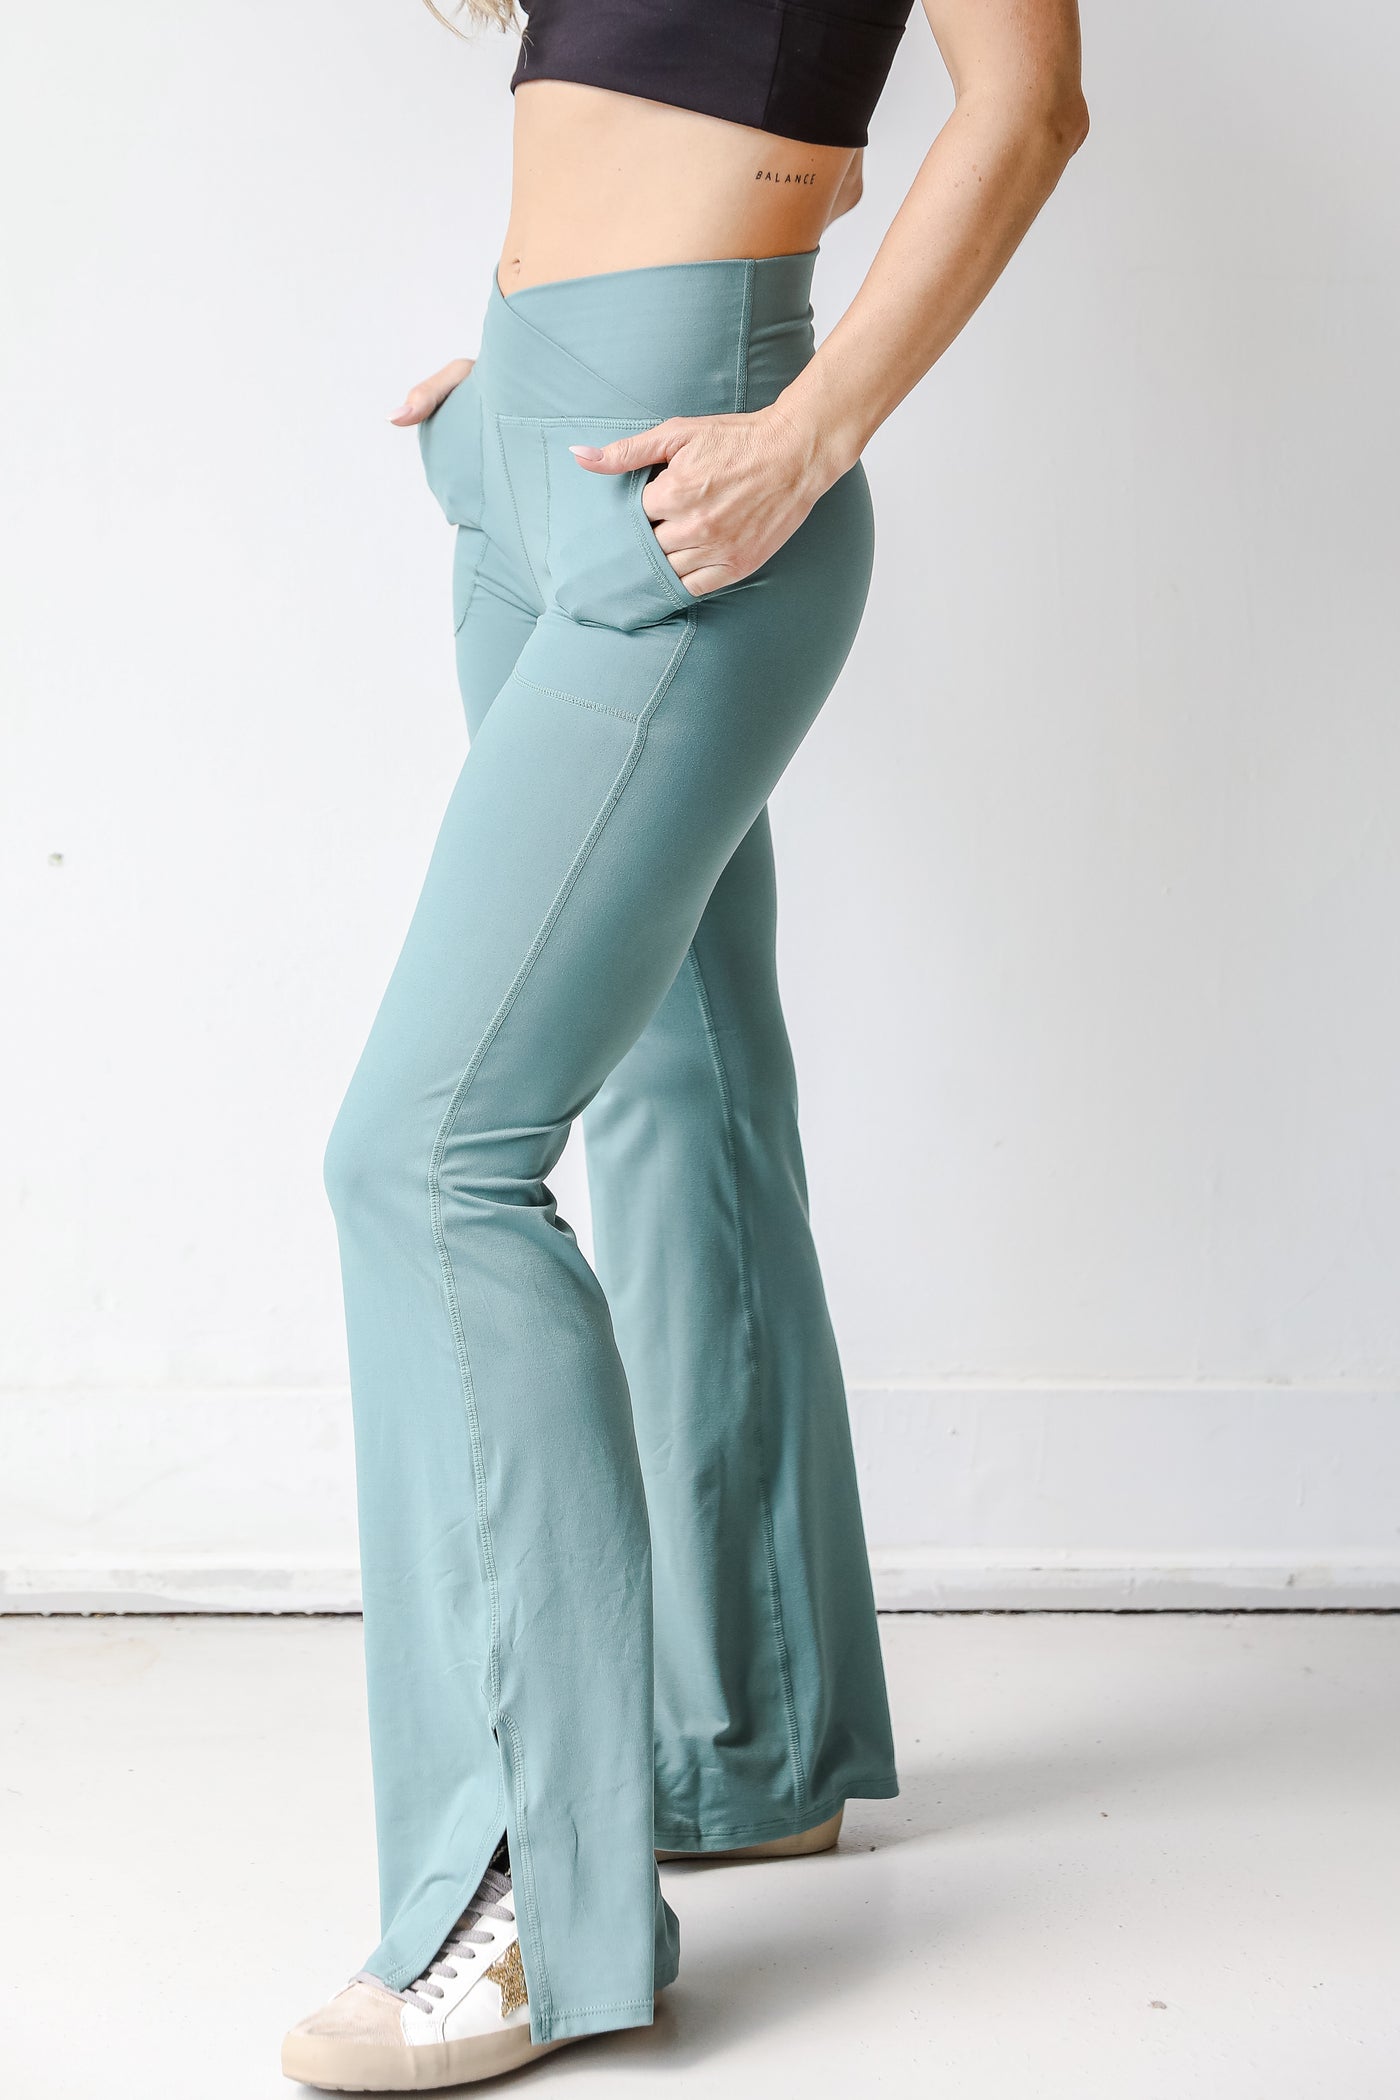 Crossover Flared Leggings in teal side view